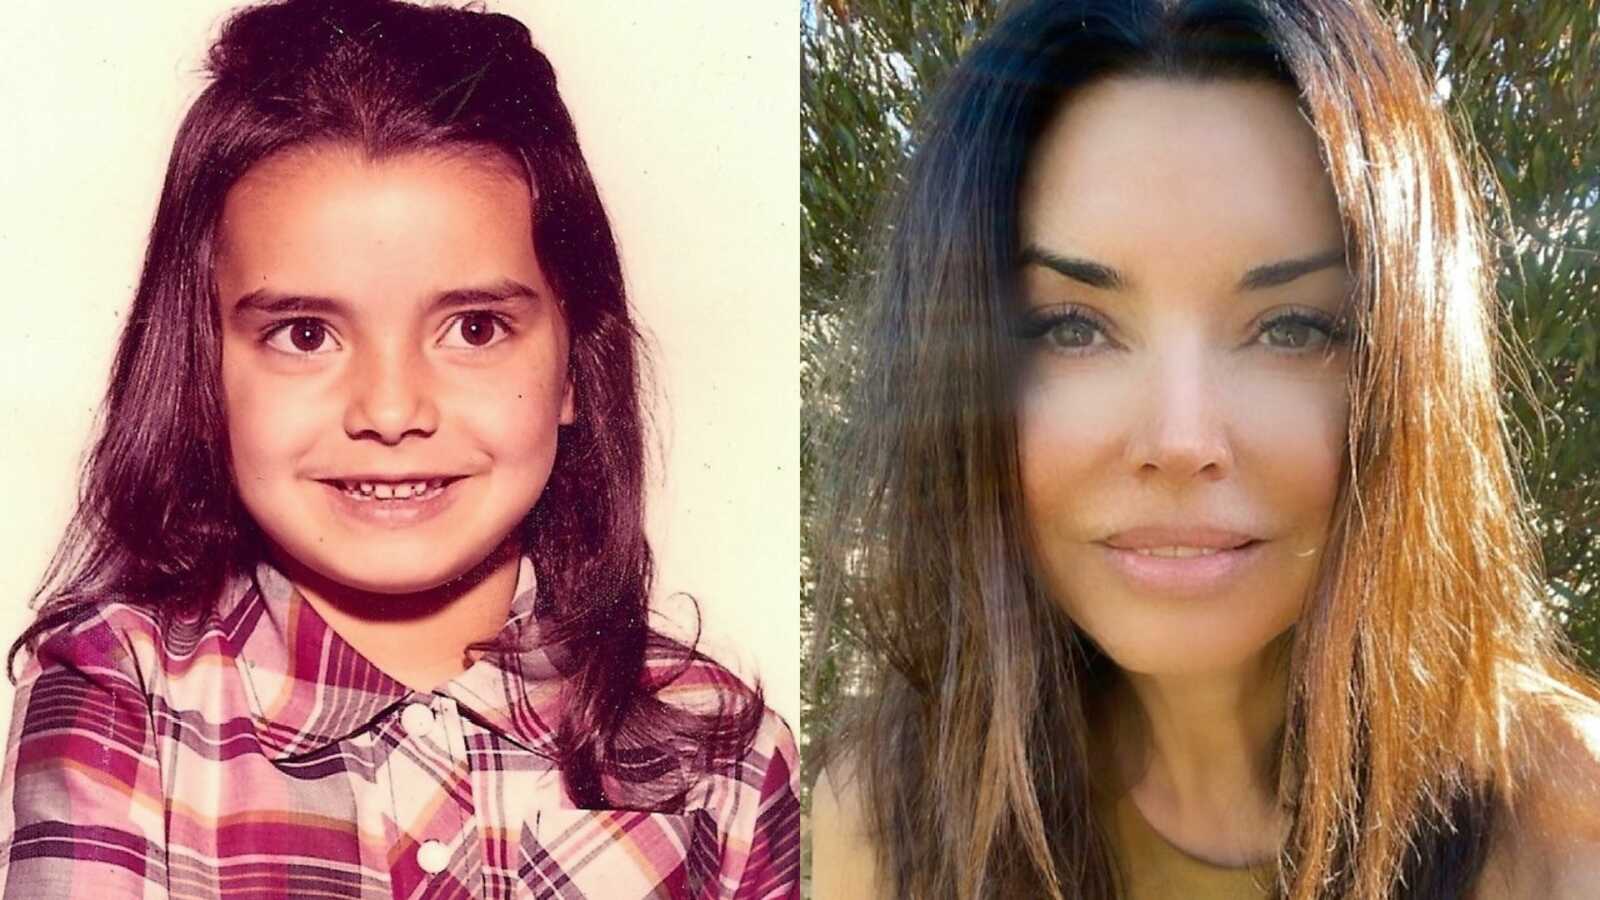 International adoptee shares photo from childhood versus how she looks now as an adult